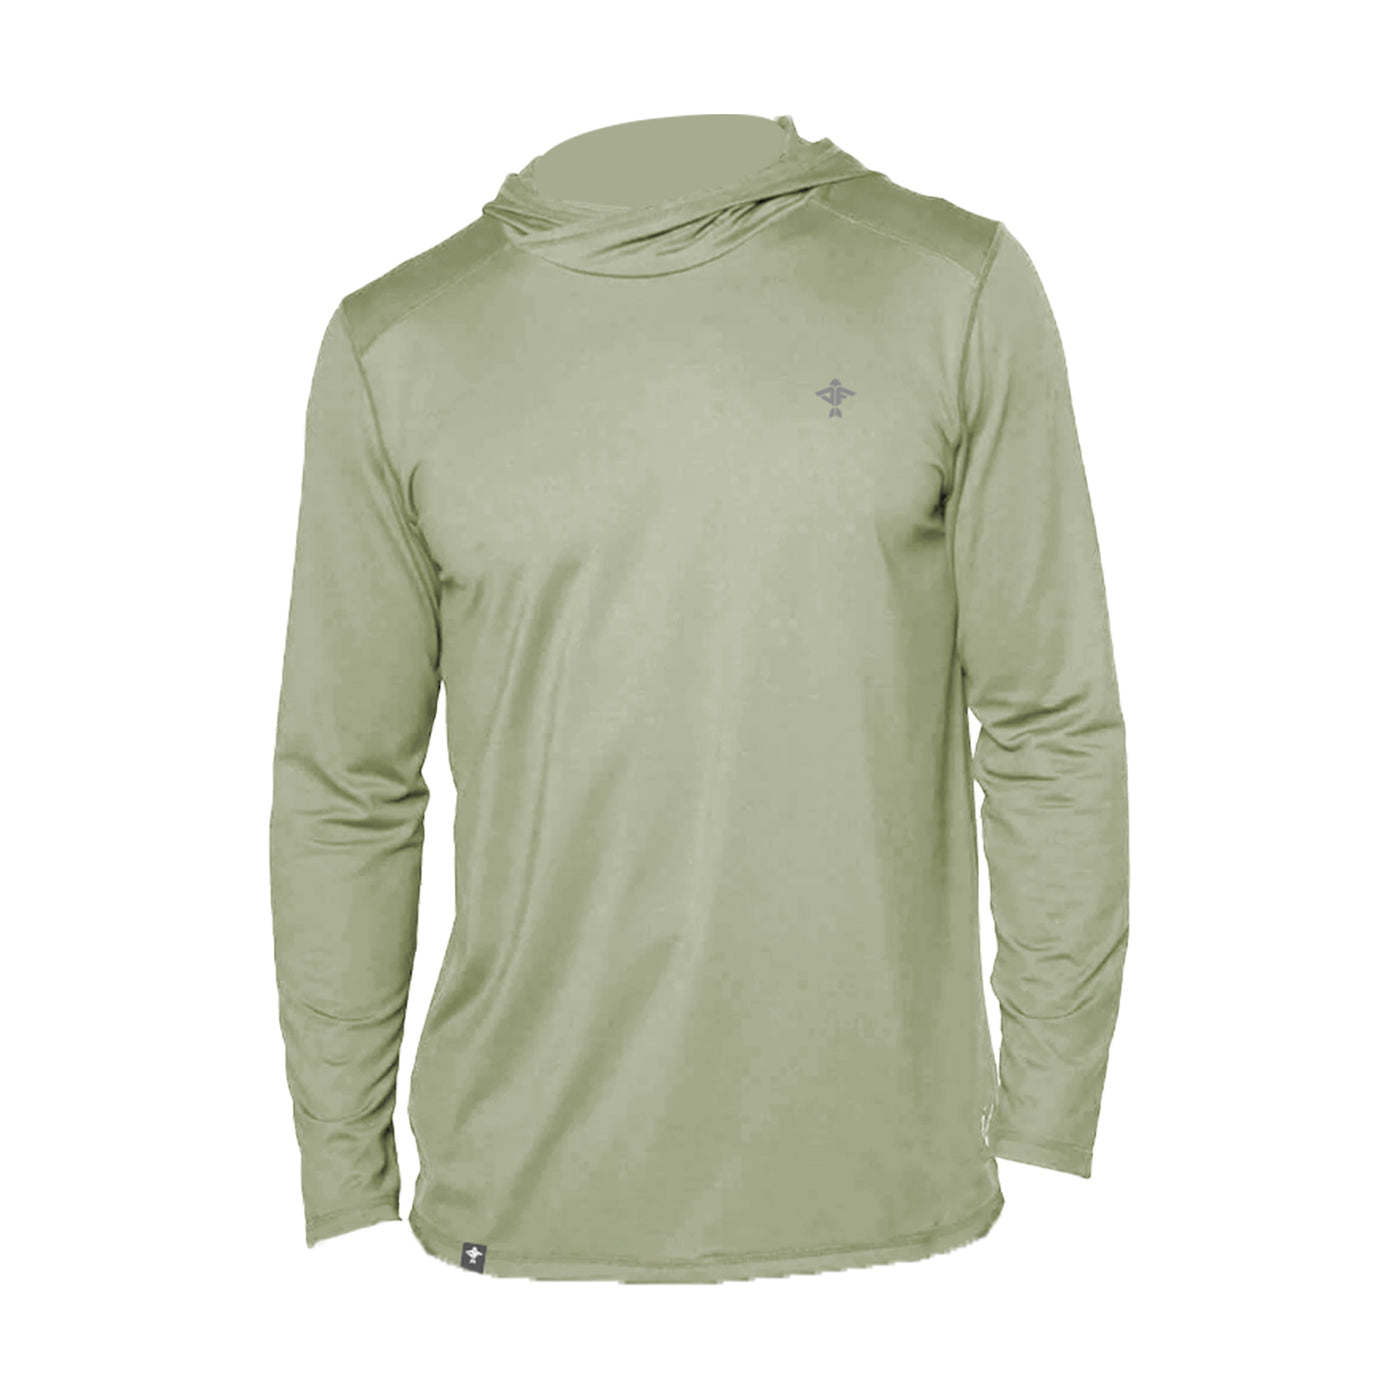 Men's All Day X-Stitched Hoodie - Parrot Cay Green